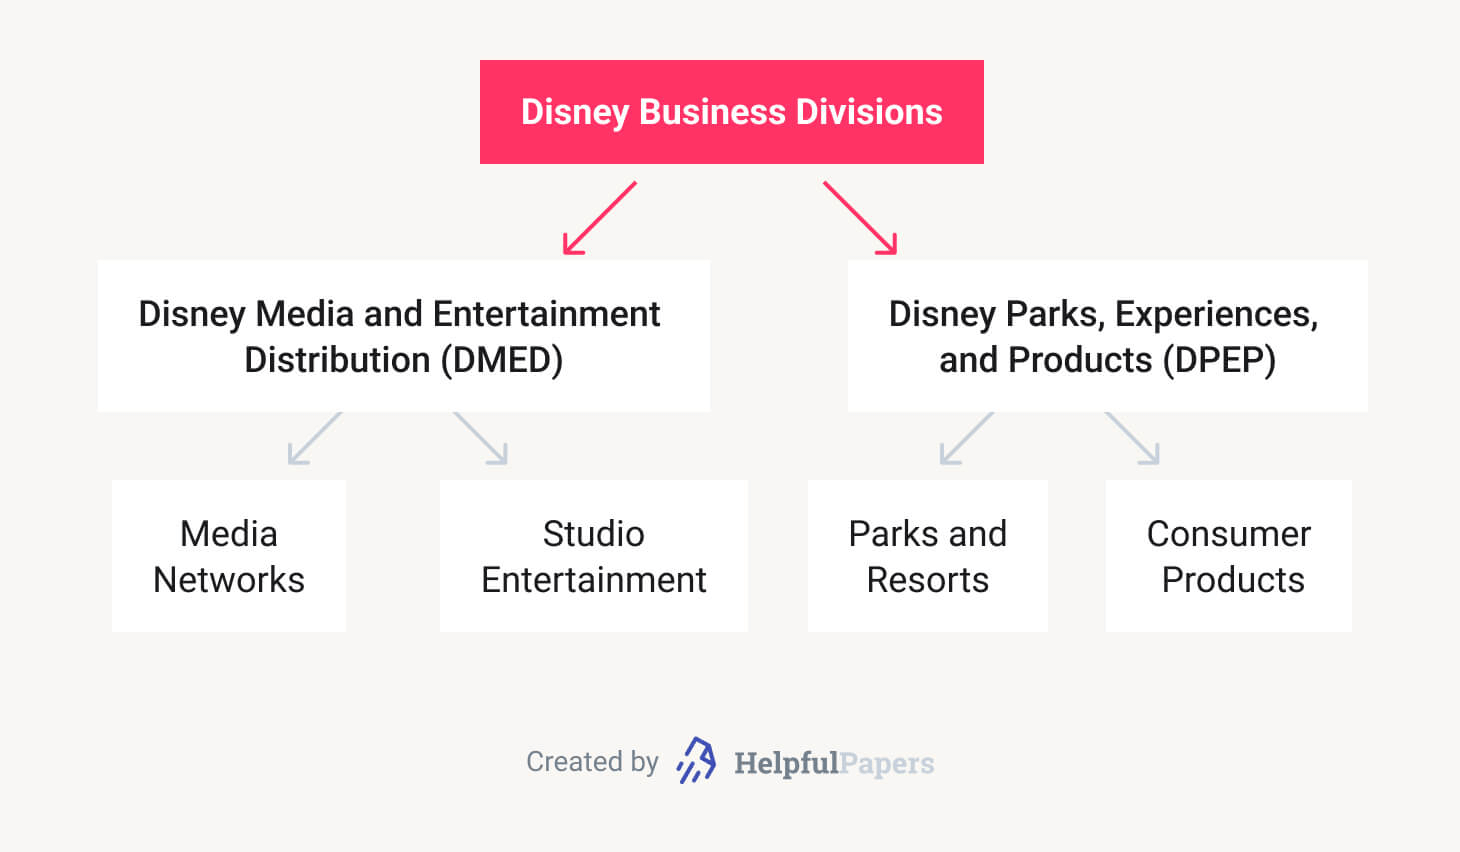 The picture provides information about Disney's business divisions.